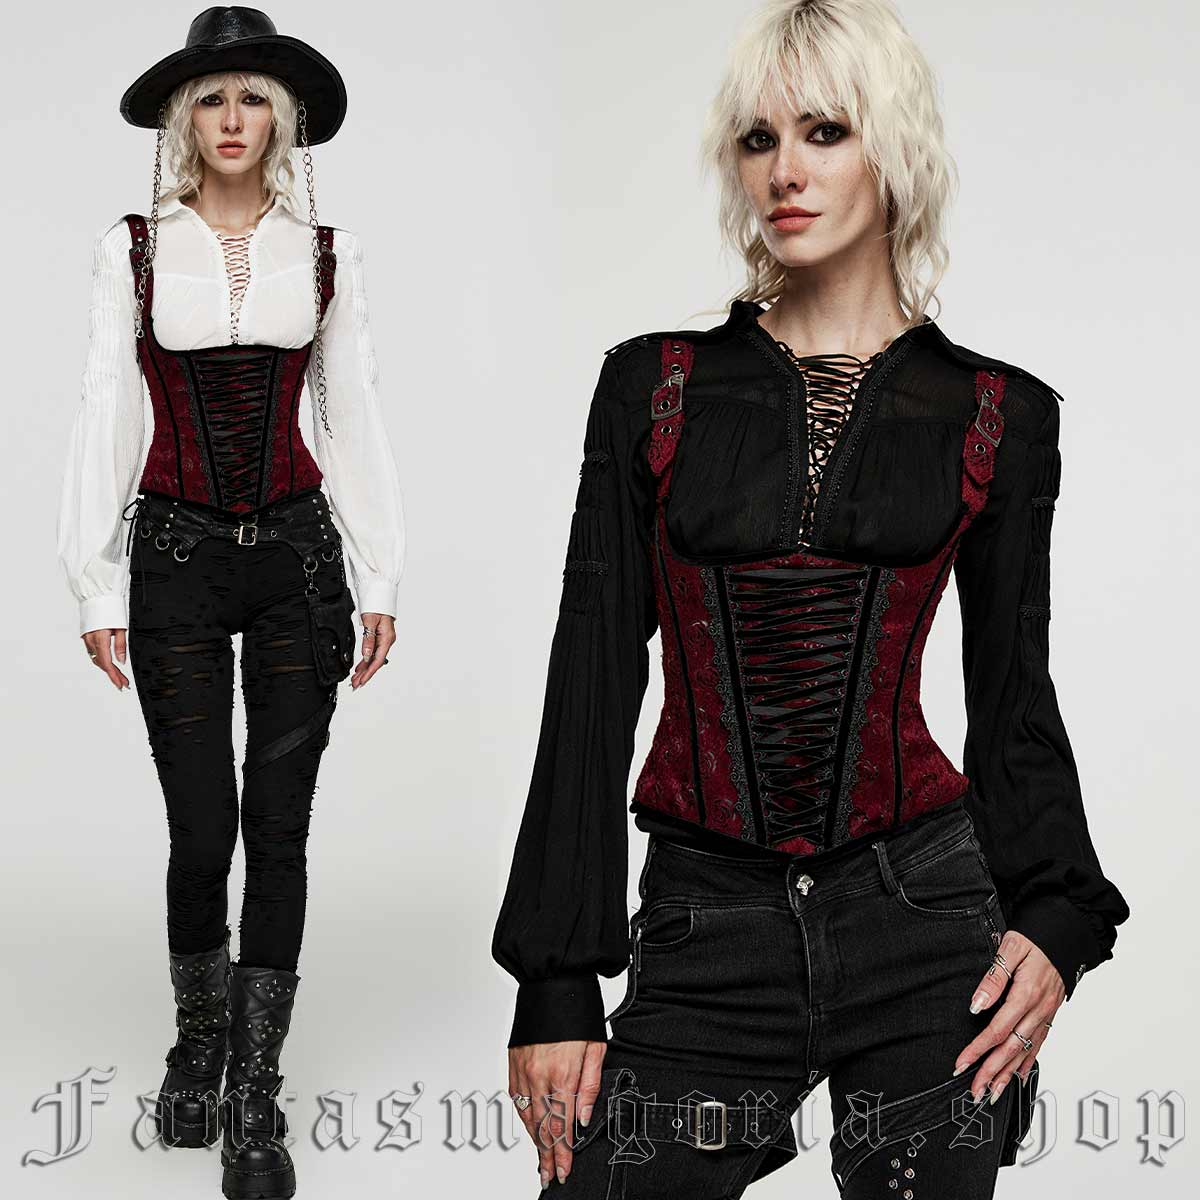 Lady Rose Steampunk / Gothic Waist Belt / Underbust Corset. With a Rose.  Armor Like. Fake Metal. Steampunk Gothic Costume. -  Canada